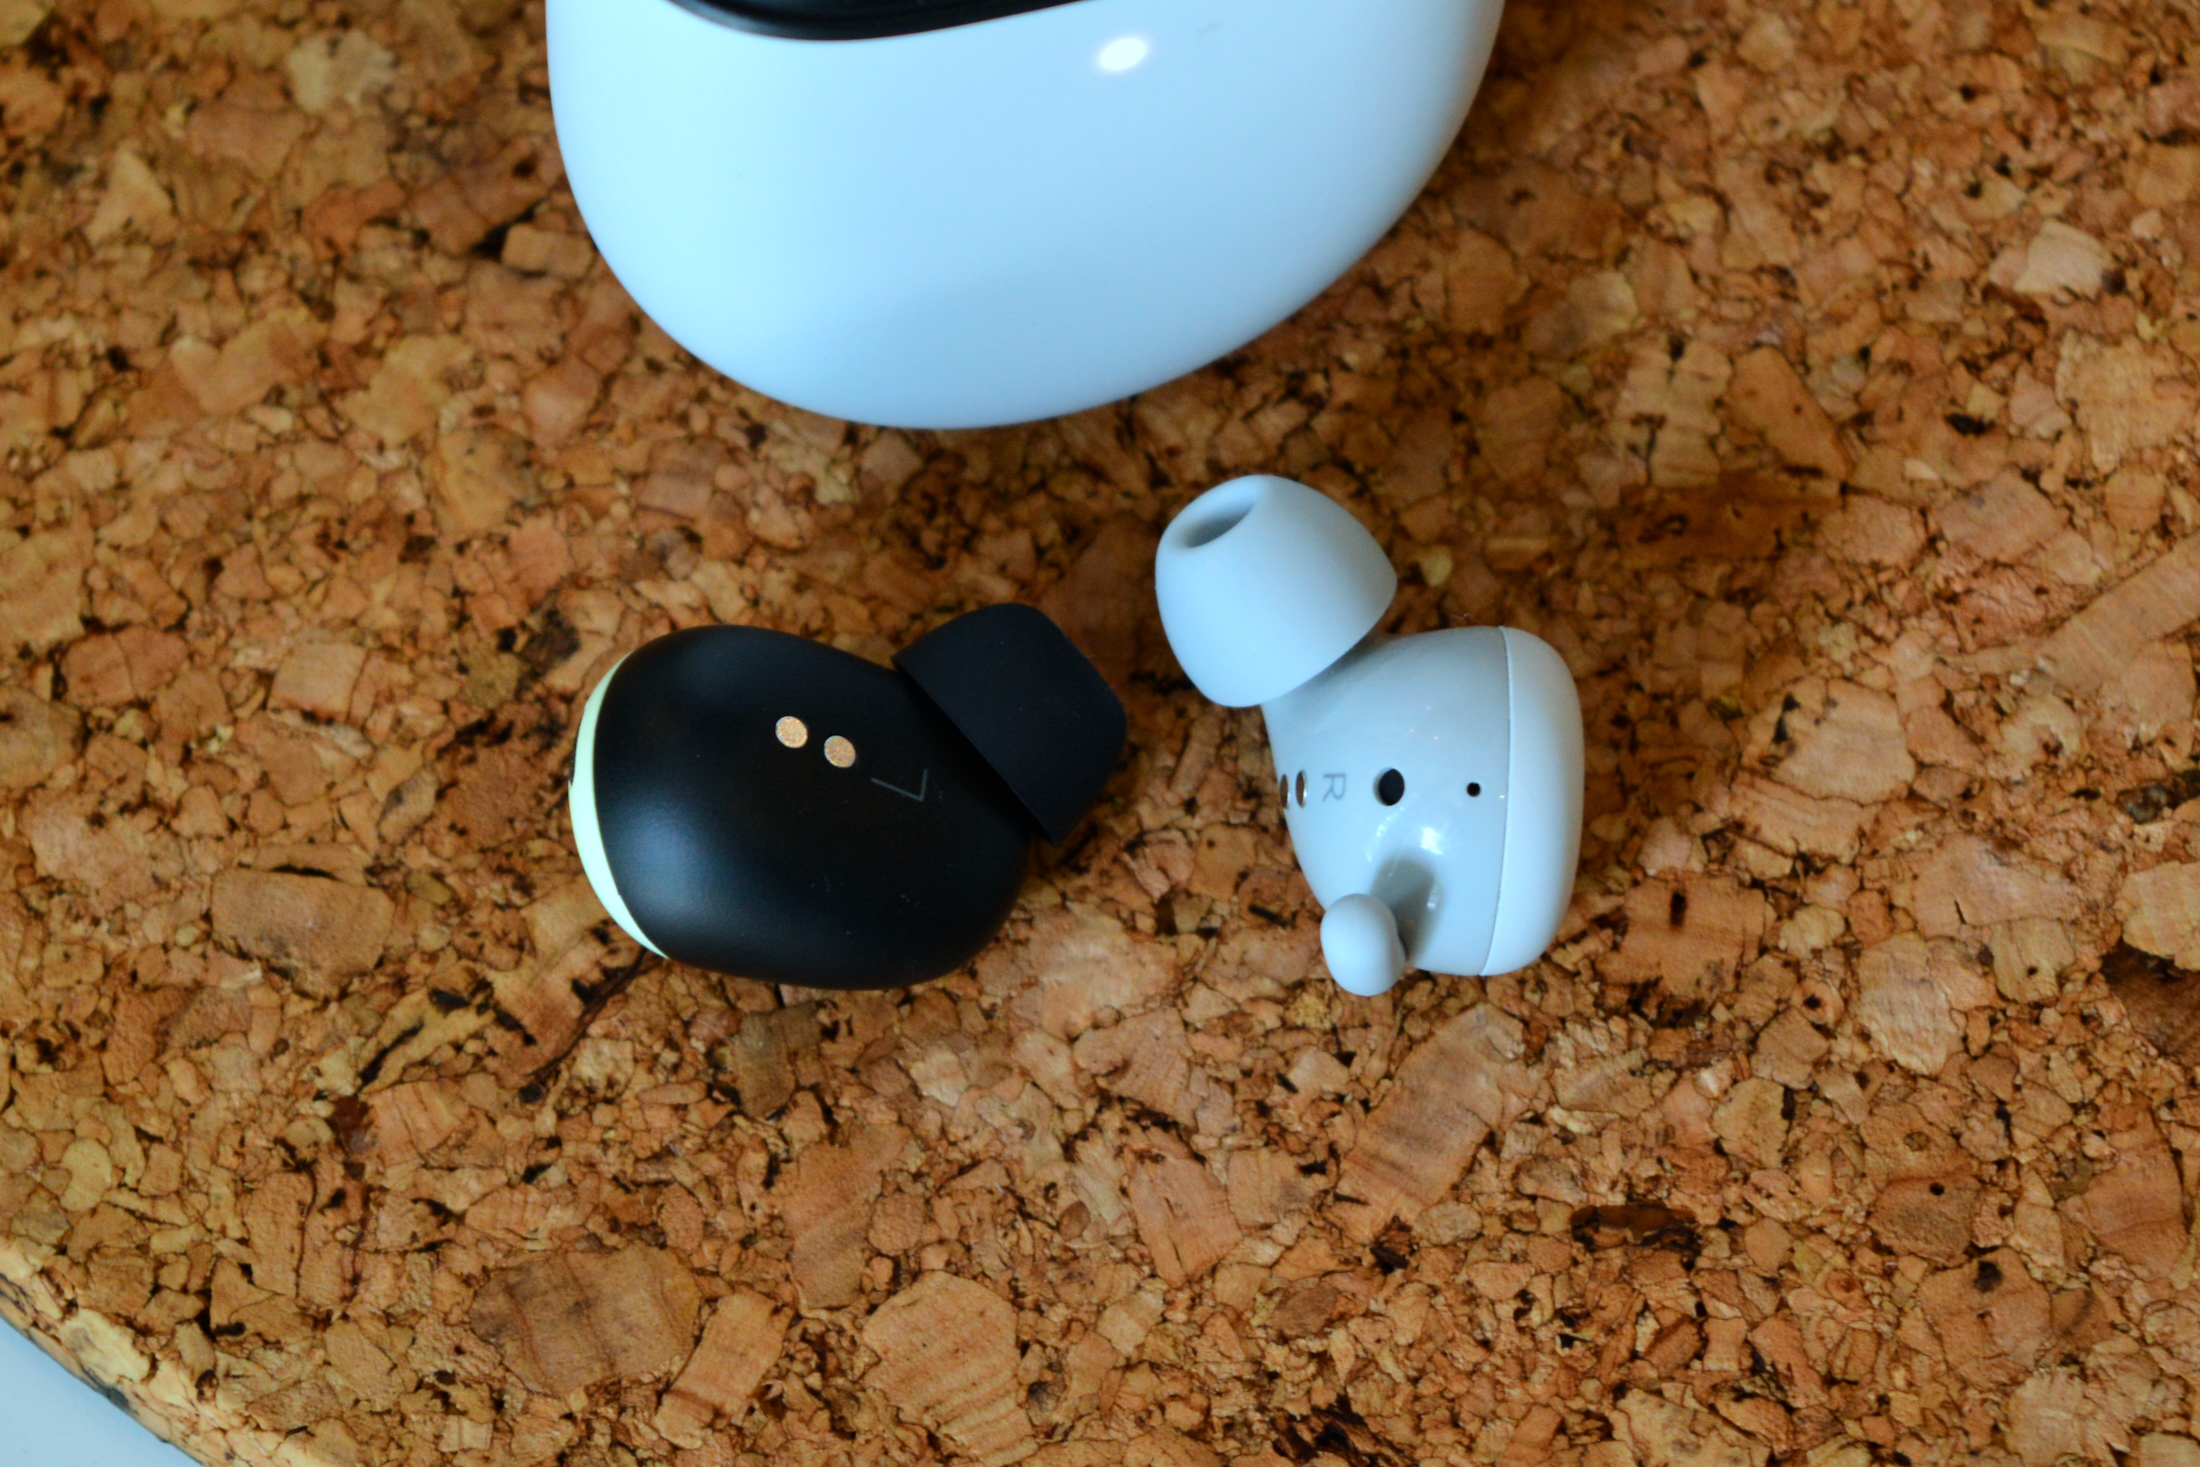 Like AirPods Pro 2, Google's Pixel Buds Pro Add Conversation Detection and  Other New Features - CNET